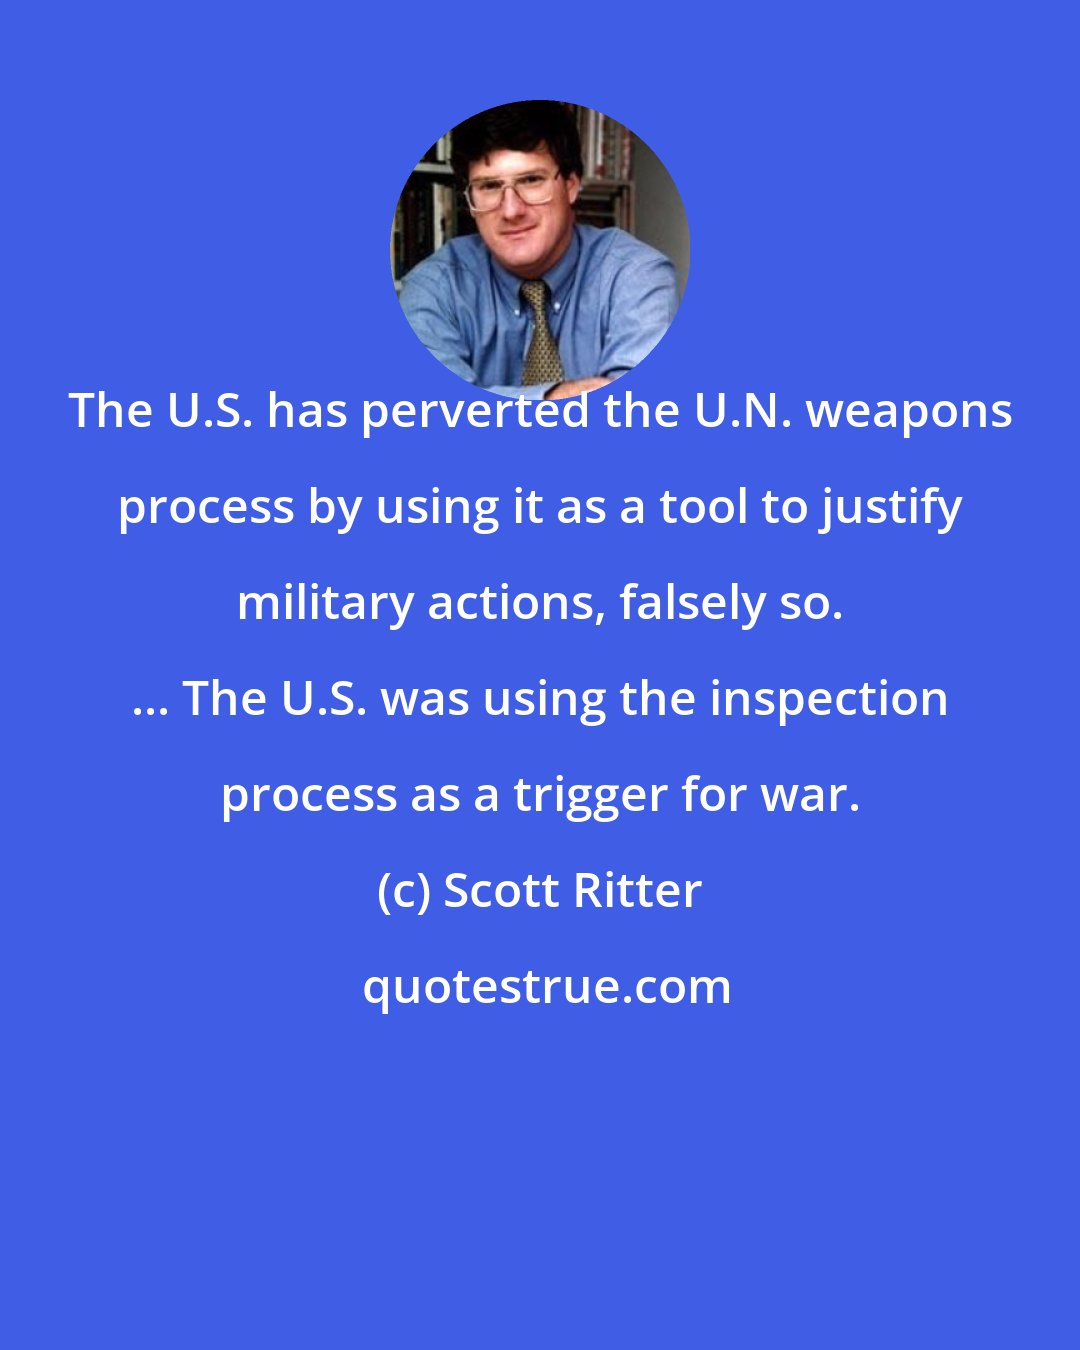 Scott Ritter: The U.S. has perverted the U.N. weapons process by using it as a tool to justify military actions, falsely so. ... The U.S. was using the inspection process as a trigger for war.